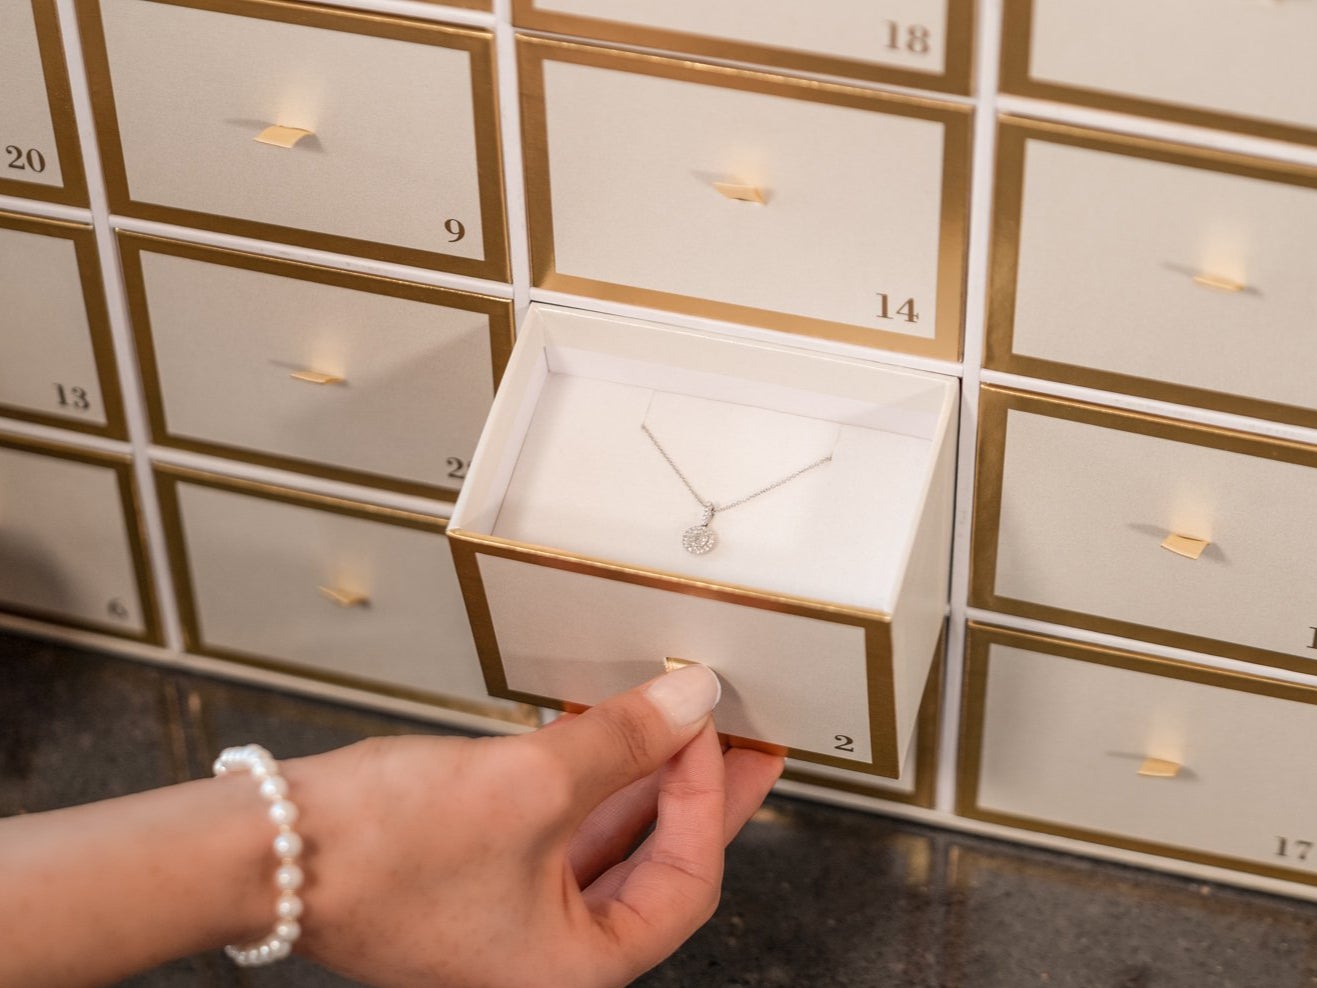 A jewellery advent calendar by CW Sellors would set buyers back by £20,000